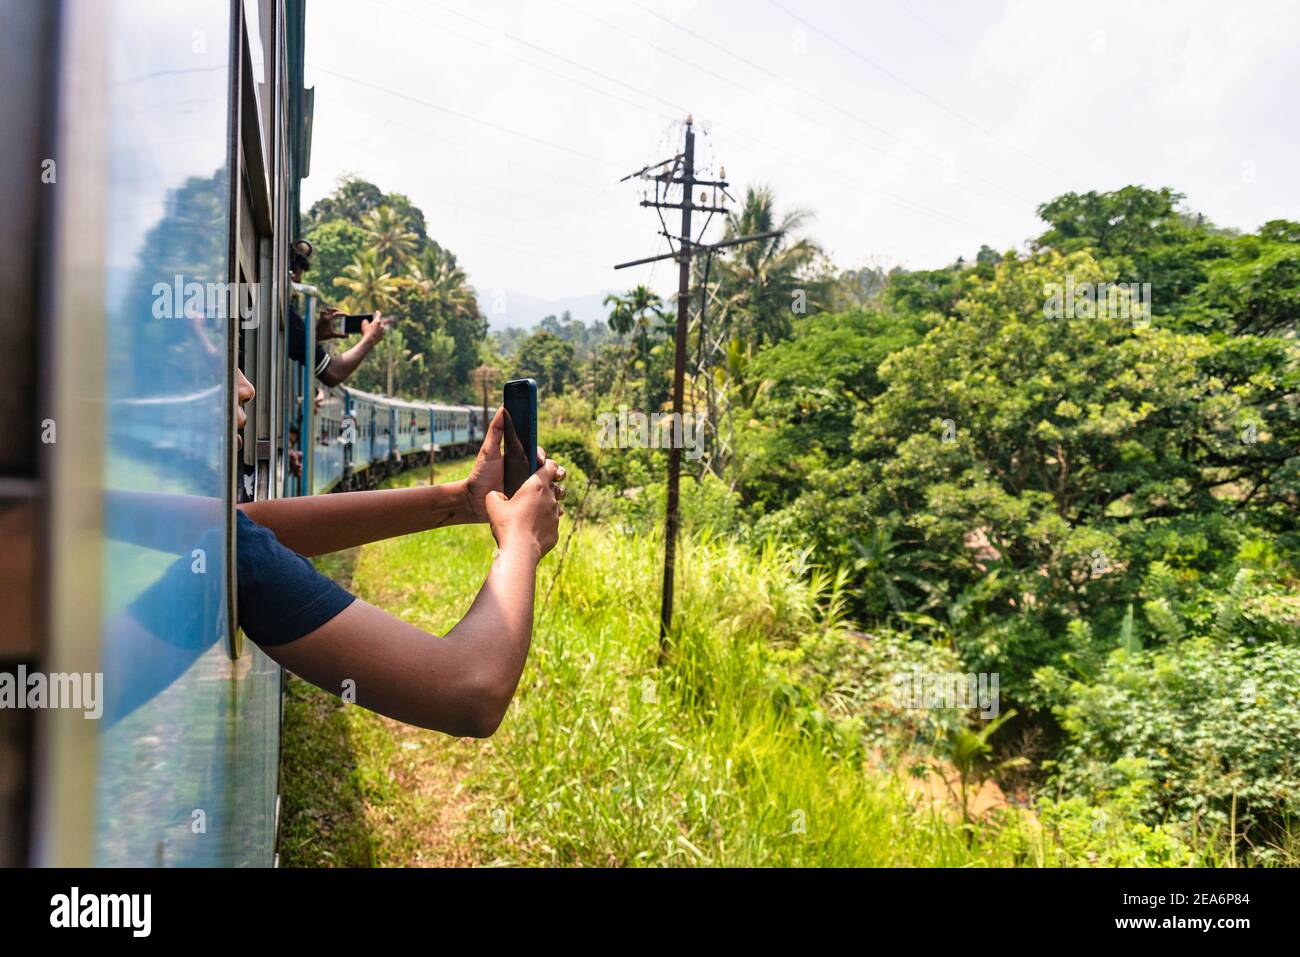 Man holding arm and taking phoot outside a Train of the Sri Lanka Railway, Scenic train journey through lush green forest in the hills Stock Photo